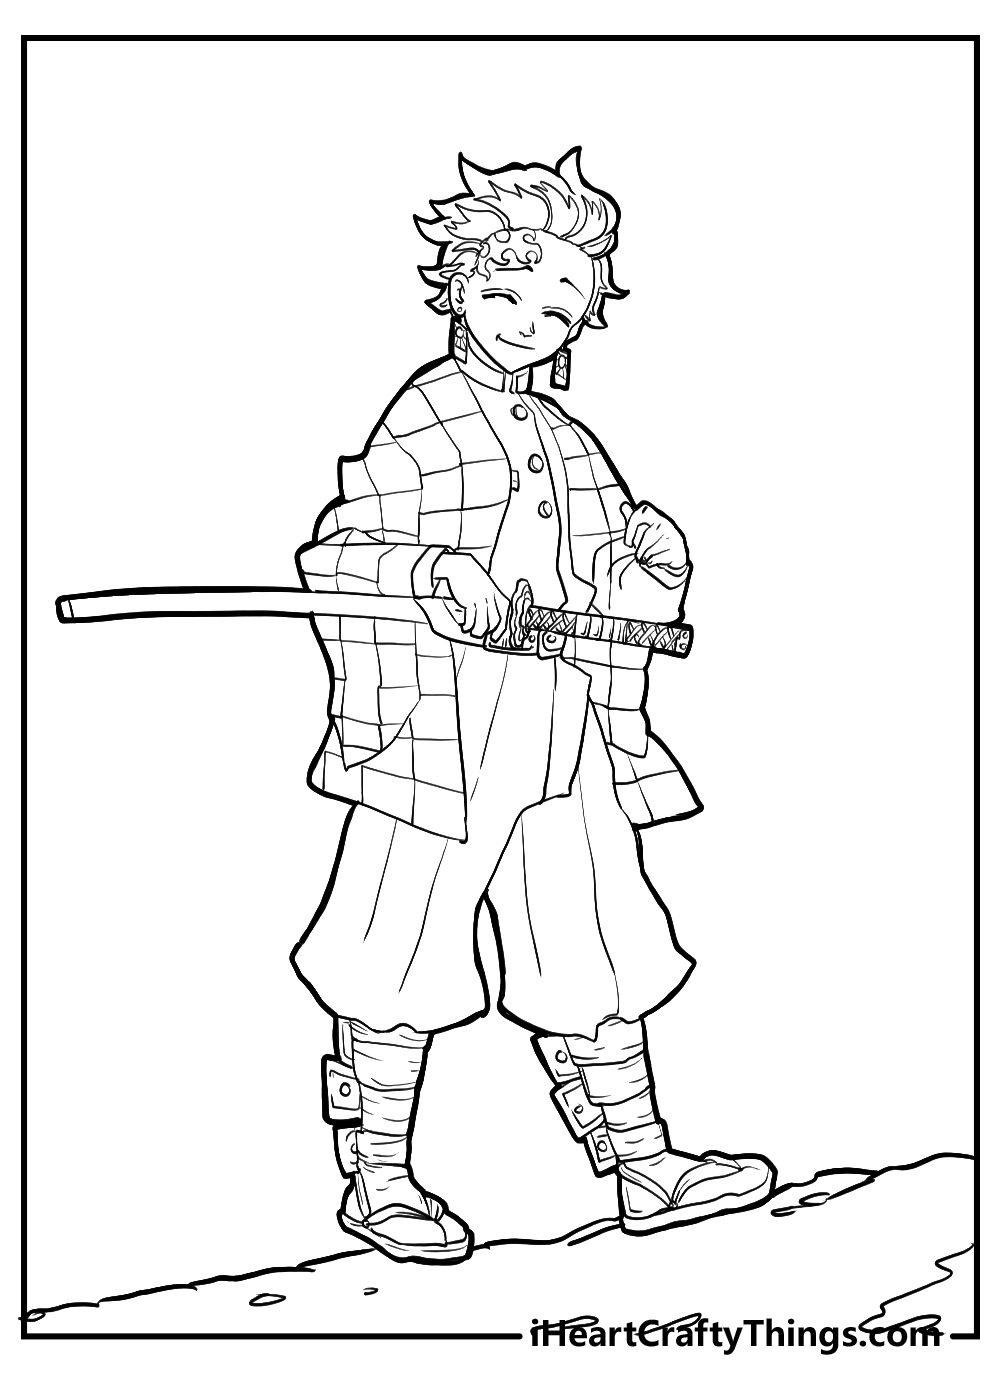 Printable demon slayer coloring pages updated